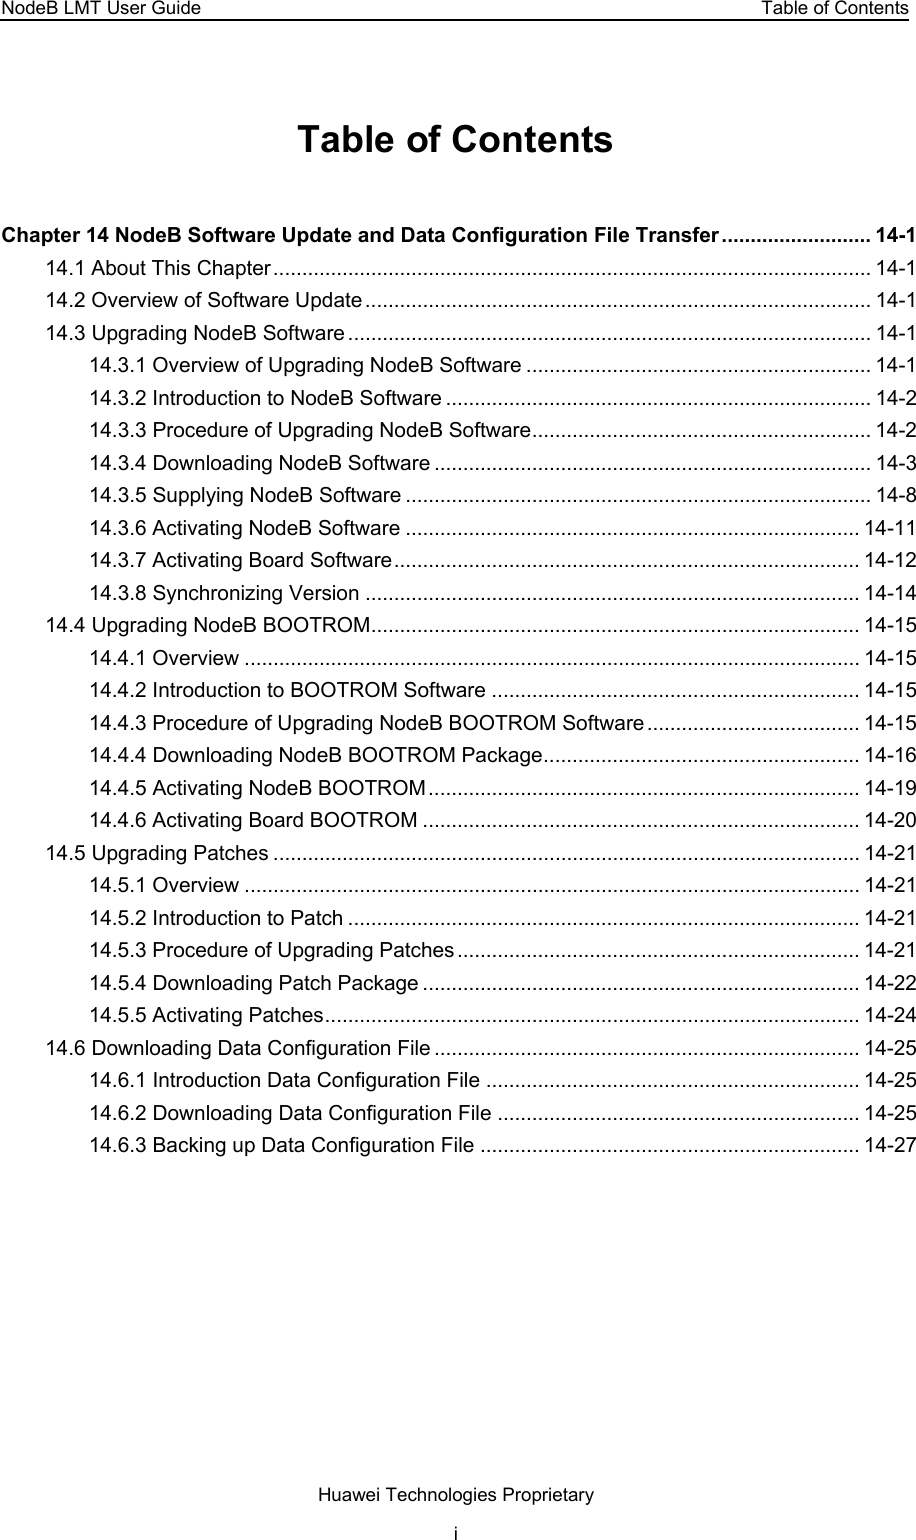 NodeB LMT User Guide  Table of Contents Table of Contents Chapter 14 NodeB Software Update and Data Configuration File Transfer.......................... 14-1 14.1 About This Chapter........................................................................................................ 14-1 14.2 Overview of Software Update........................................................................................ 14-1 14.3 Upgrading NodeB Software........................................................................................... 14-1 14.3.1 Overview of Upgrading NodeB Software ............................................................ 14-1 14.3.2 Introduction to NodeB Software .......................................................................... 14-2 14.3.3 Procedure of Upgrading NodeB Software........................................................... 14-2 14.3.4 Downloading NodeB Software ............................................................................ 14-3 14.3.5 Supplying NodeB Software ................................................................................. 14-8 14.3.6 Activating NodeB Software ............................................................................... 14-11 14.3.7 Activating Board Software................................................................................. 14-12 14.3.8 Synchronizing Version ...................................................................................... 14-14 14.4 Upgrading NodeB BOOTROM..................................................................................... 14-15 14.4.1 Overview ........................................................................................................... 14-15 14.4.2 Introduction to BOOTROM Software ................................................................ 14-15 14.4.3 Procedure of Upgrading NodeB BOOTROM Software..................................... 14-15 14.4.4 Downloading NodeB BOOTROM Package....................................................... 14-16 14.4.5 Activating NodeB BOOTROM........................................................................... 14-19 14.4.6 Activating Board BOOTROM ............................................................................ 14-20 14.5 Upgrading Patches ...................................................................................................... 14-21 14.5.1 Overview ........................................................................................................... 14-21 14.5.2 Introduction to Patch ......................................................................................... 14-21 14.5.3 Procedure of Upgrading Patches...................................................................... 14-21 14.5.4 Downloading Patch Package ............................................................................ 14-22 14.5.5 Activating Patches............................................................................................. 14-24 14.6 Downloading Data Configuration File .......................................................................... 14-25 14.6.1 Introduction Data Configuration File ................................................................. 14-25 14.6.2 Downloading Data Configuration File ............................................................... 14-25 14.6.3 Backing up Data Configuration File .................................................................. 14-27 Huawei Technologies Proprietary i 